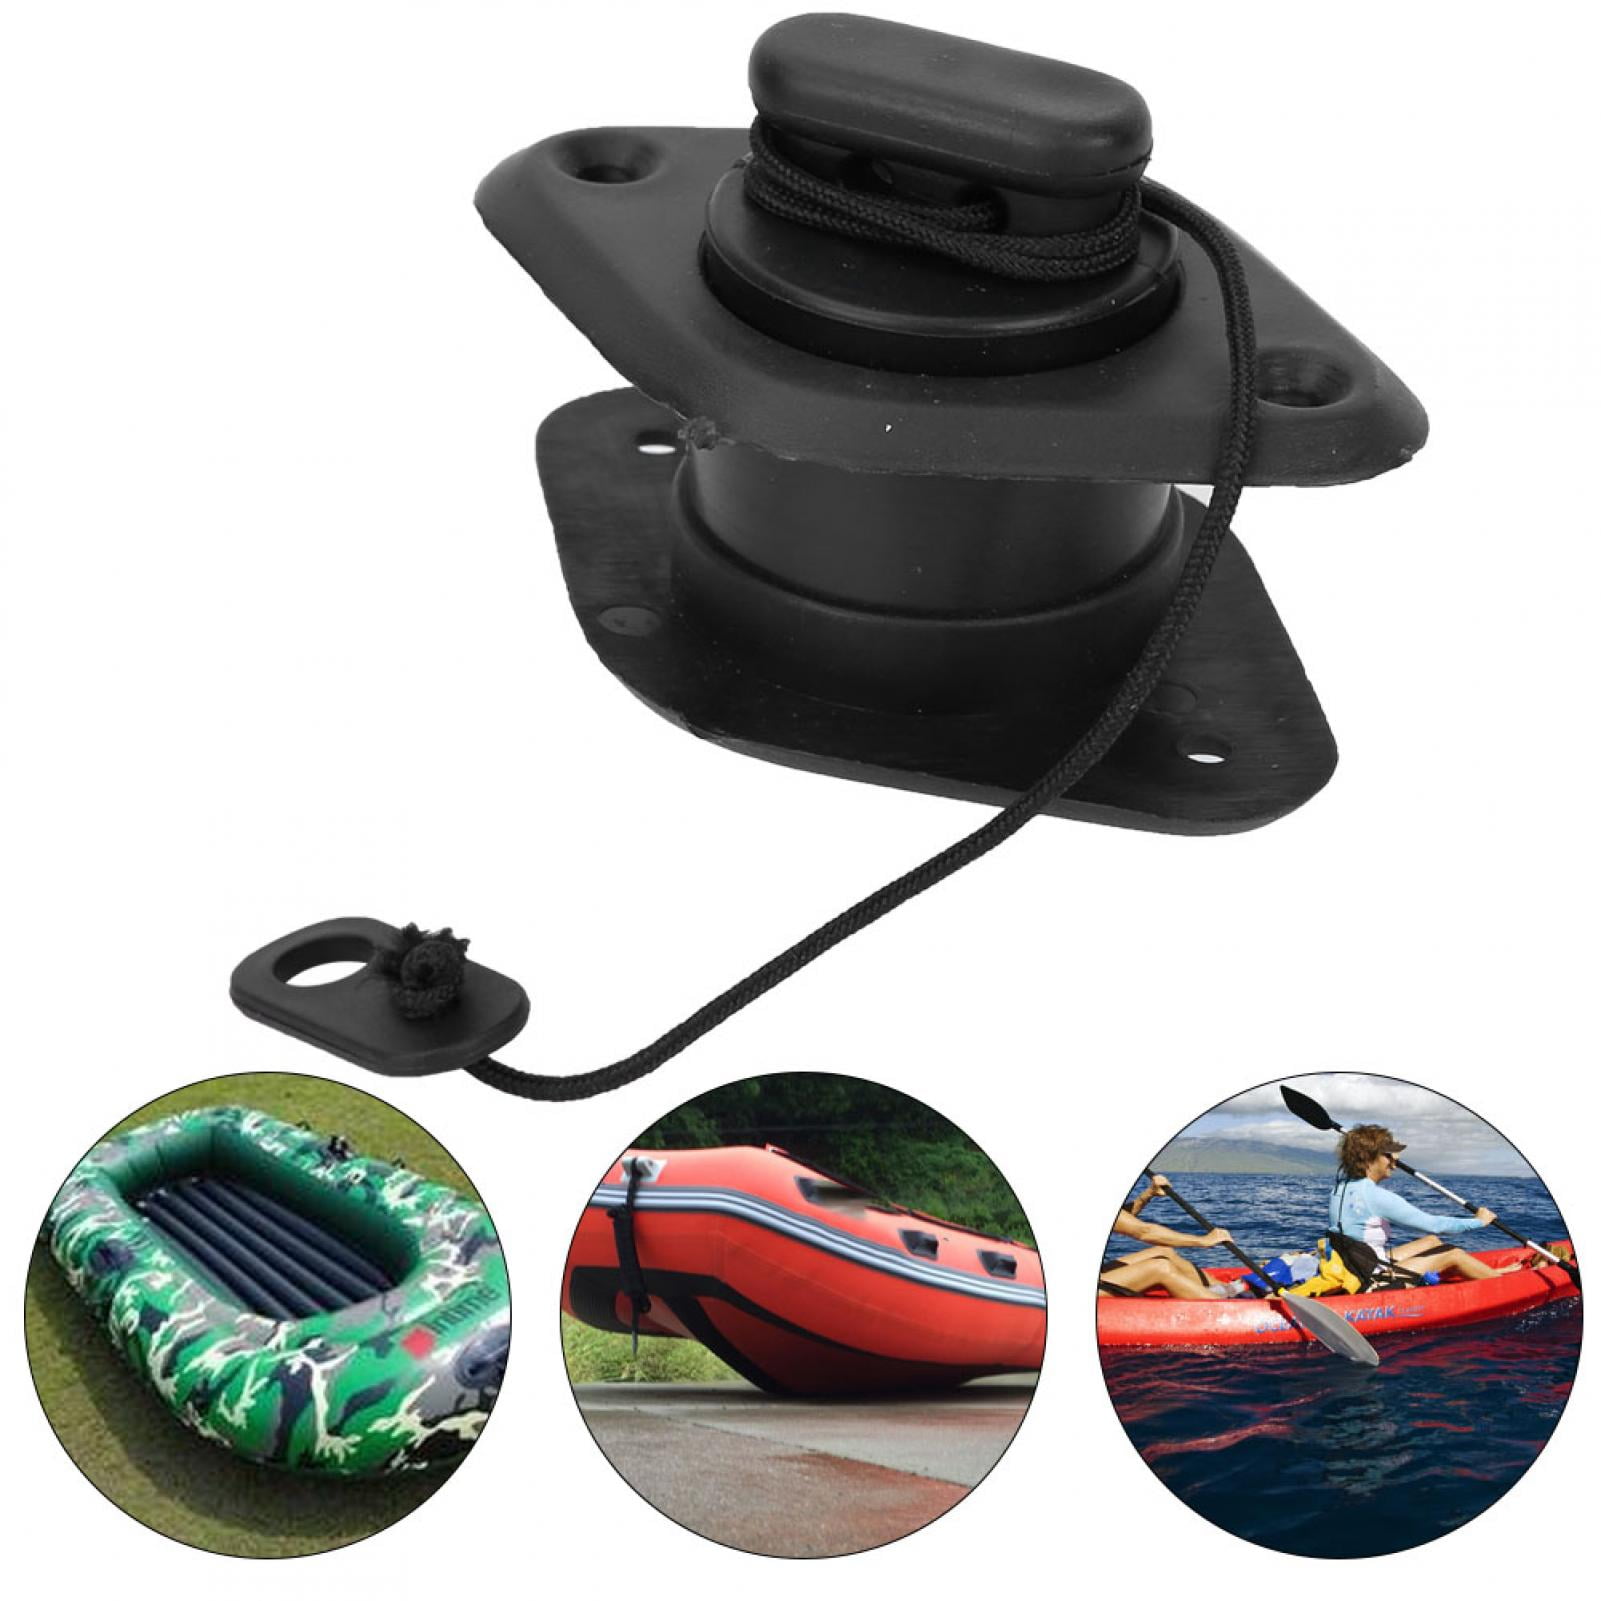 Details about   Drain Valve Durable PVC Black Drain Valve For Inflatable Boats Fishing Boat 